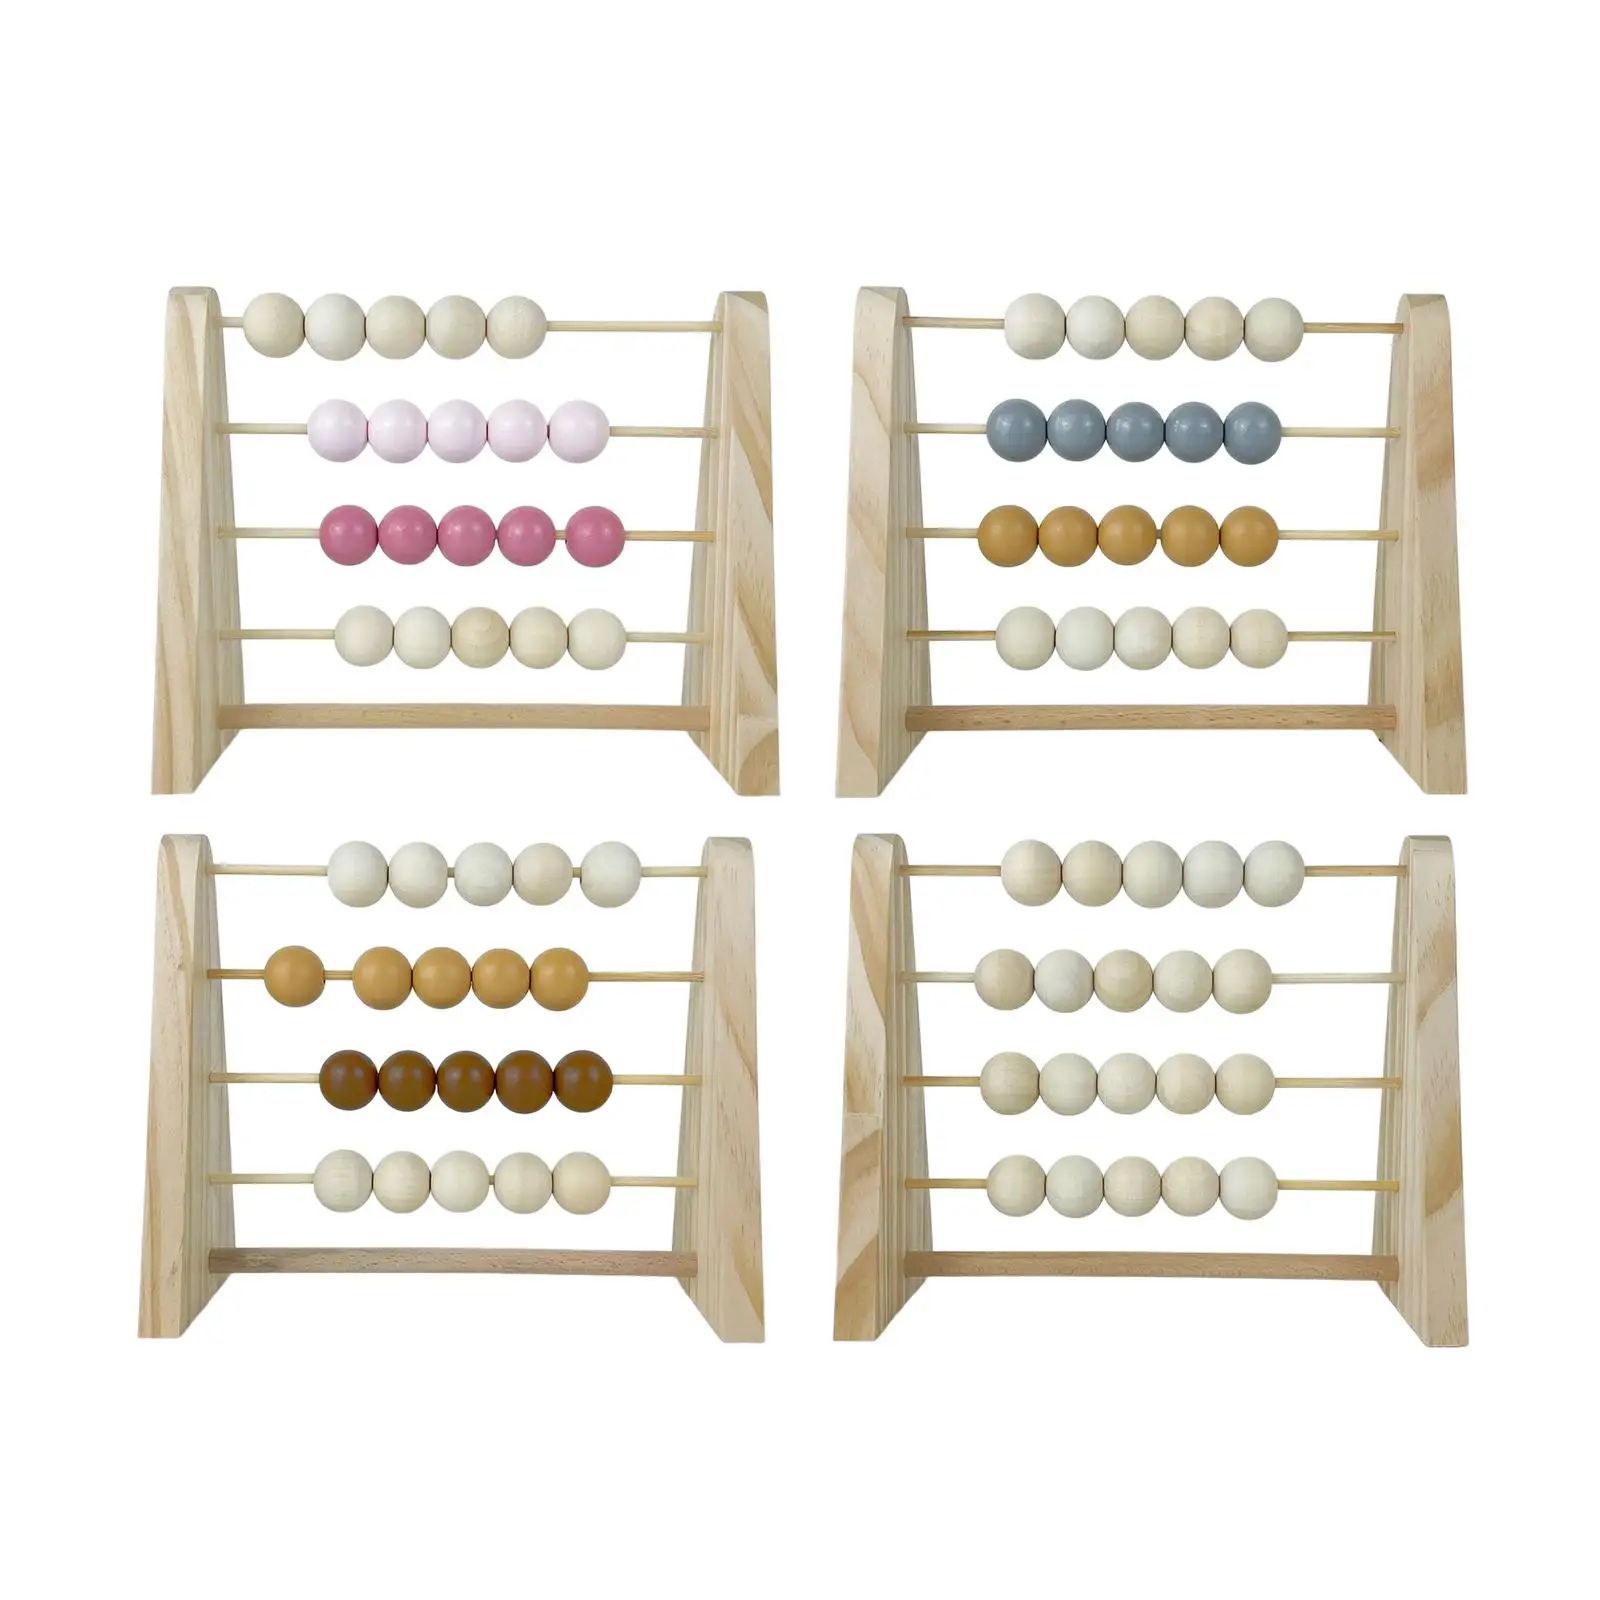 Wooden Abacus Arithmetic Wooden Beads Counting Frame for Boy Girl Children Preschool